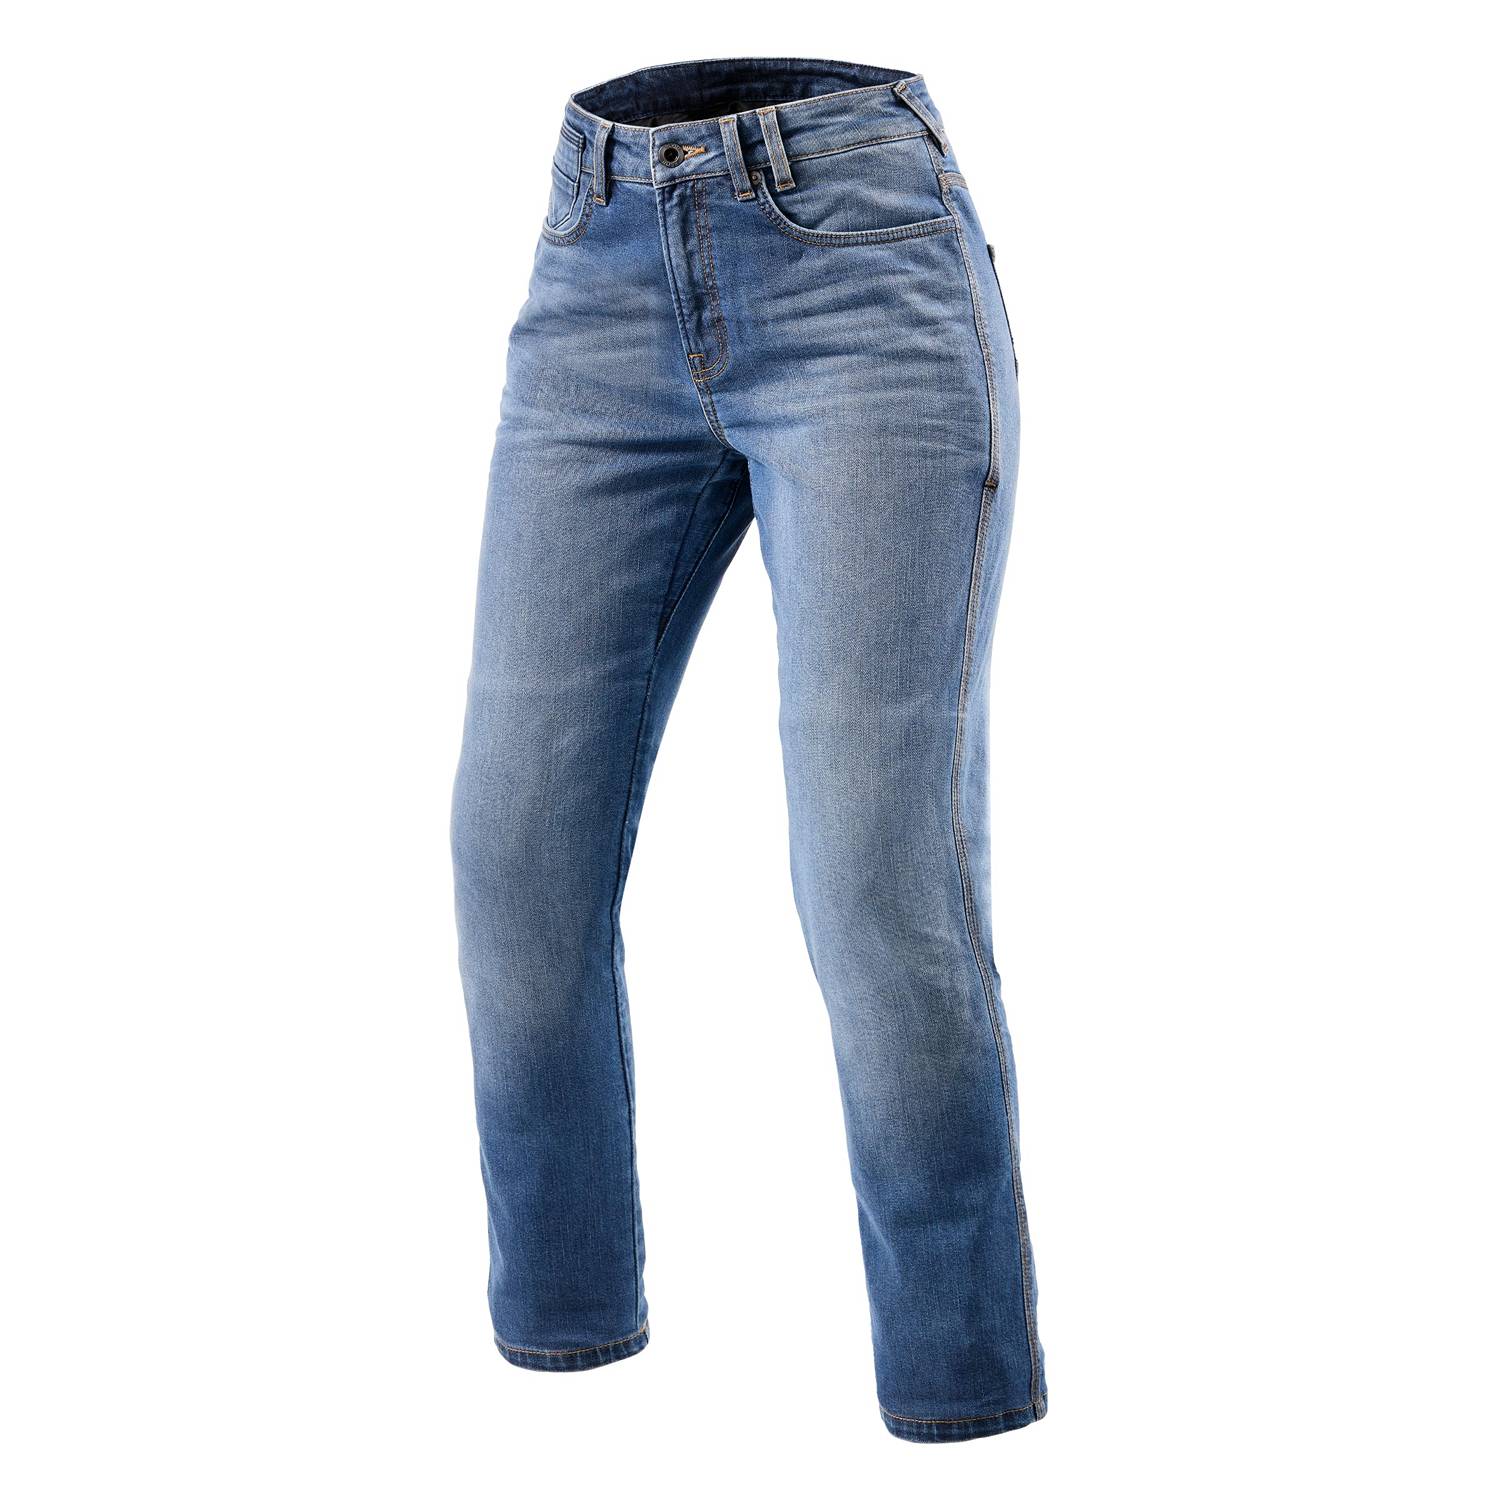 Image of REV'IT! Jeans Victoria 2 Ladies SF Classic Blue Used Motorcycle Jeans Größe L30/W28